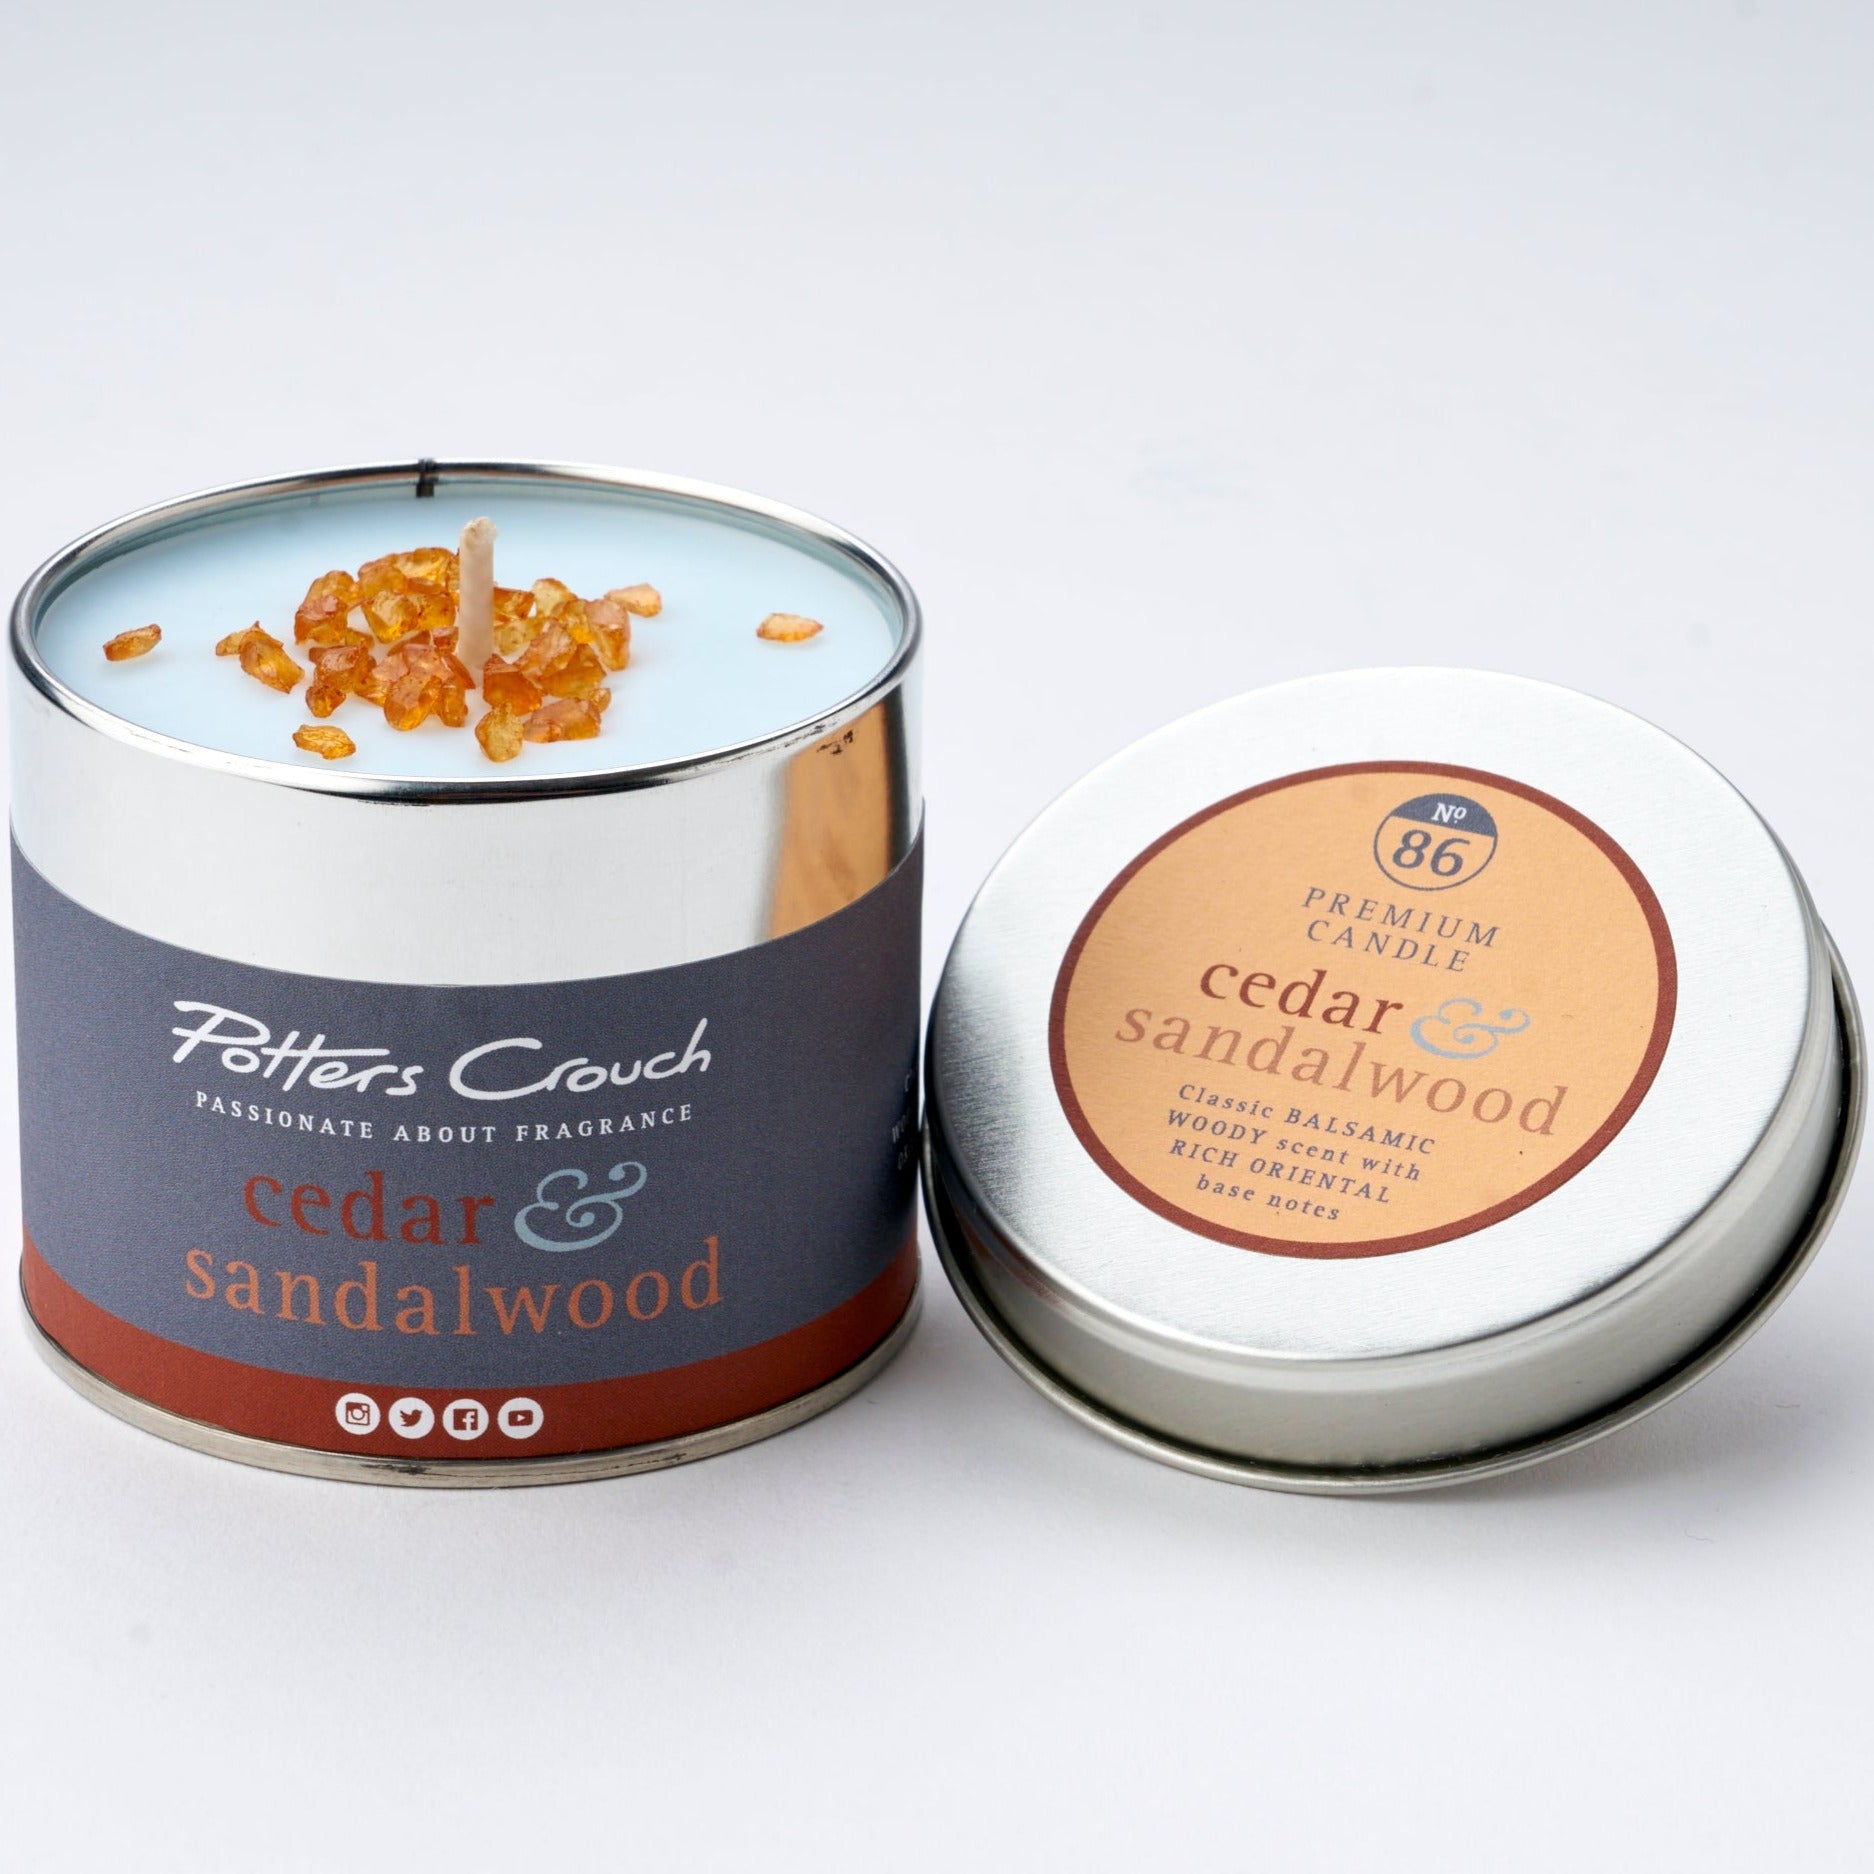 Cedar & Sandalwood - Scented Candle in a Tin - Potters Crouch